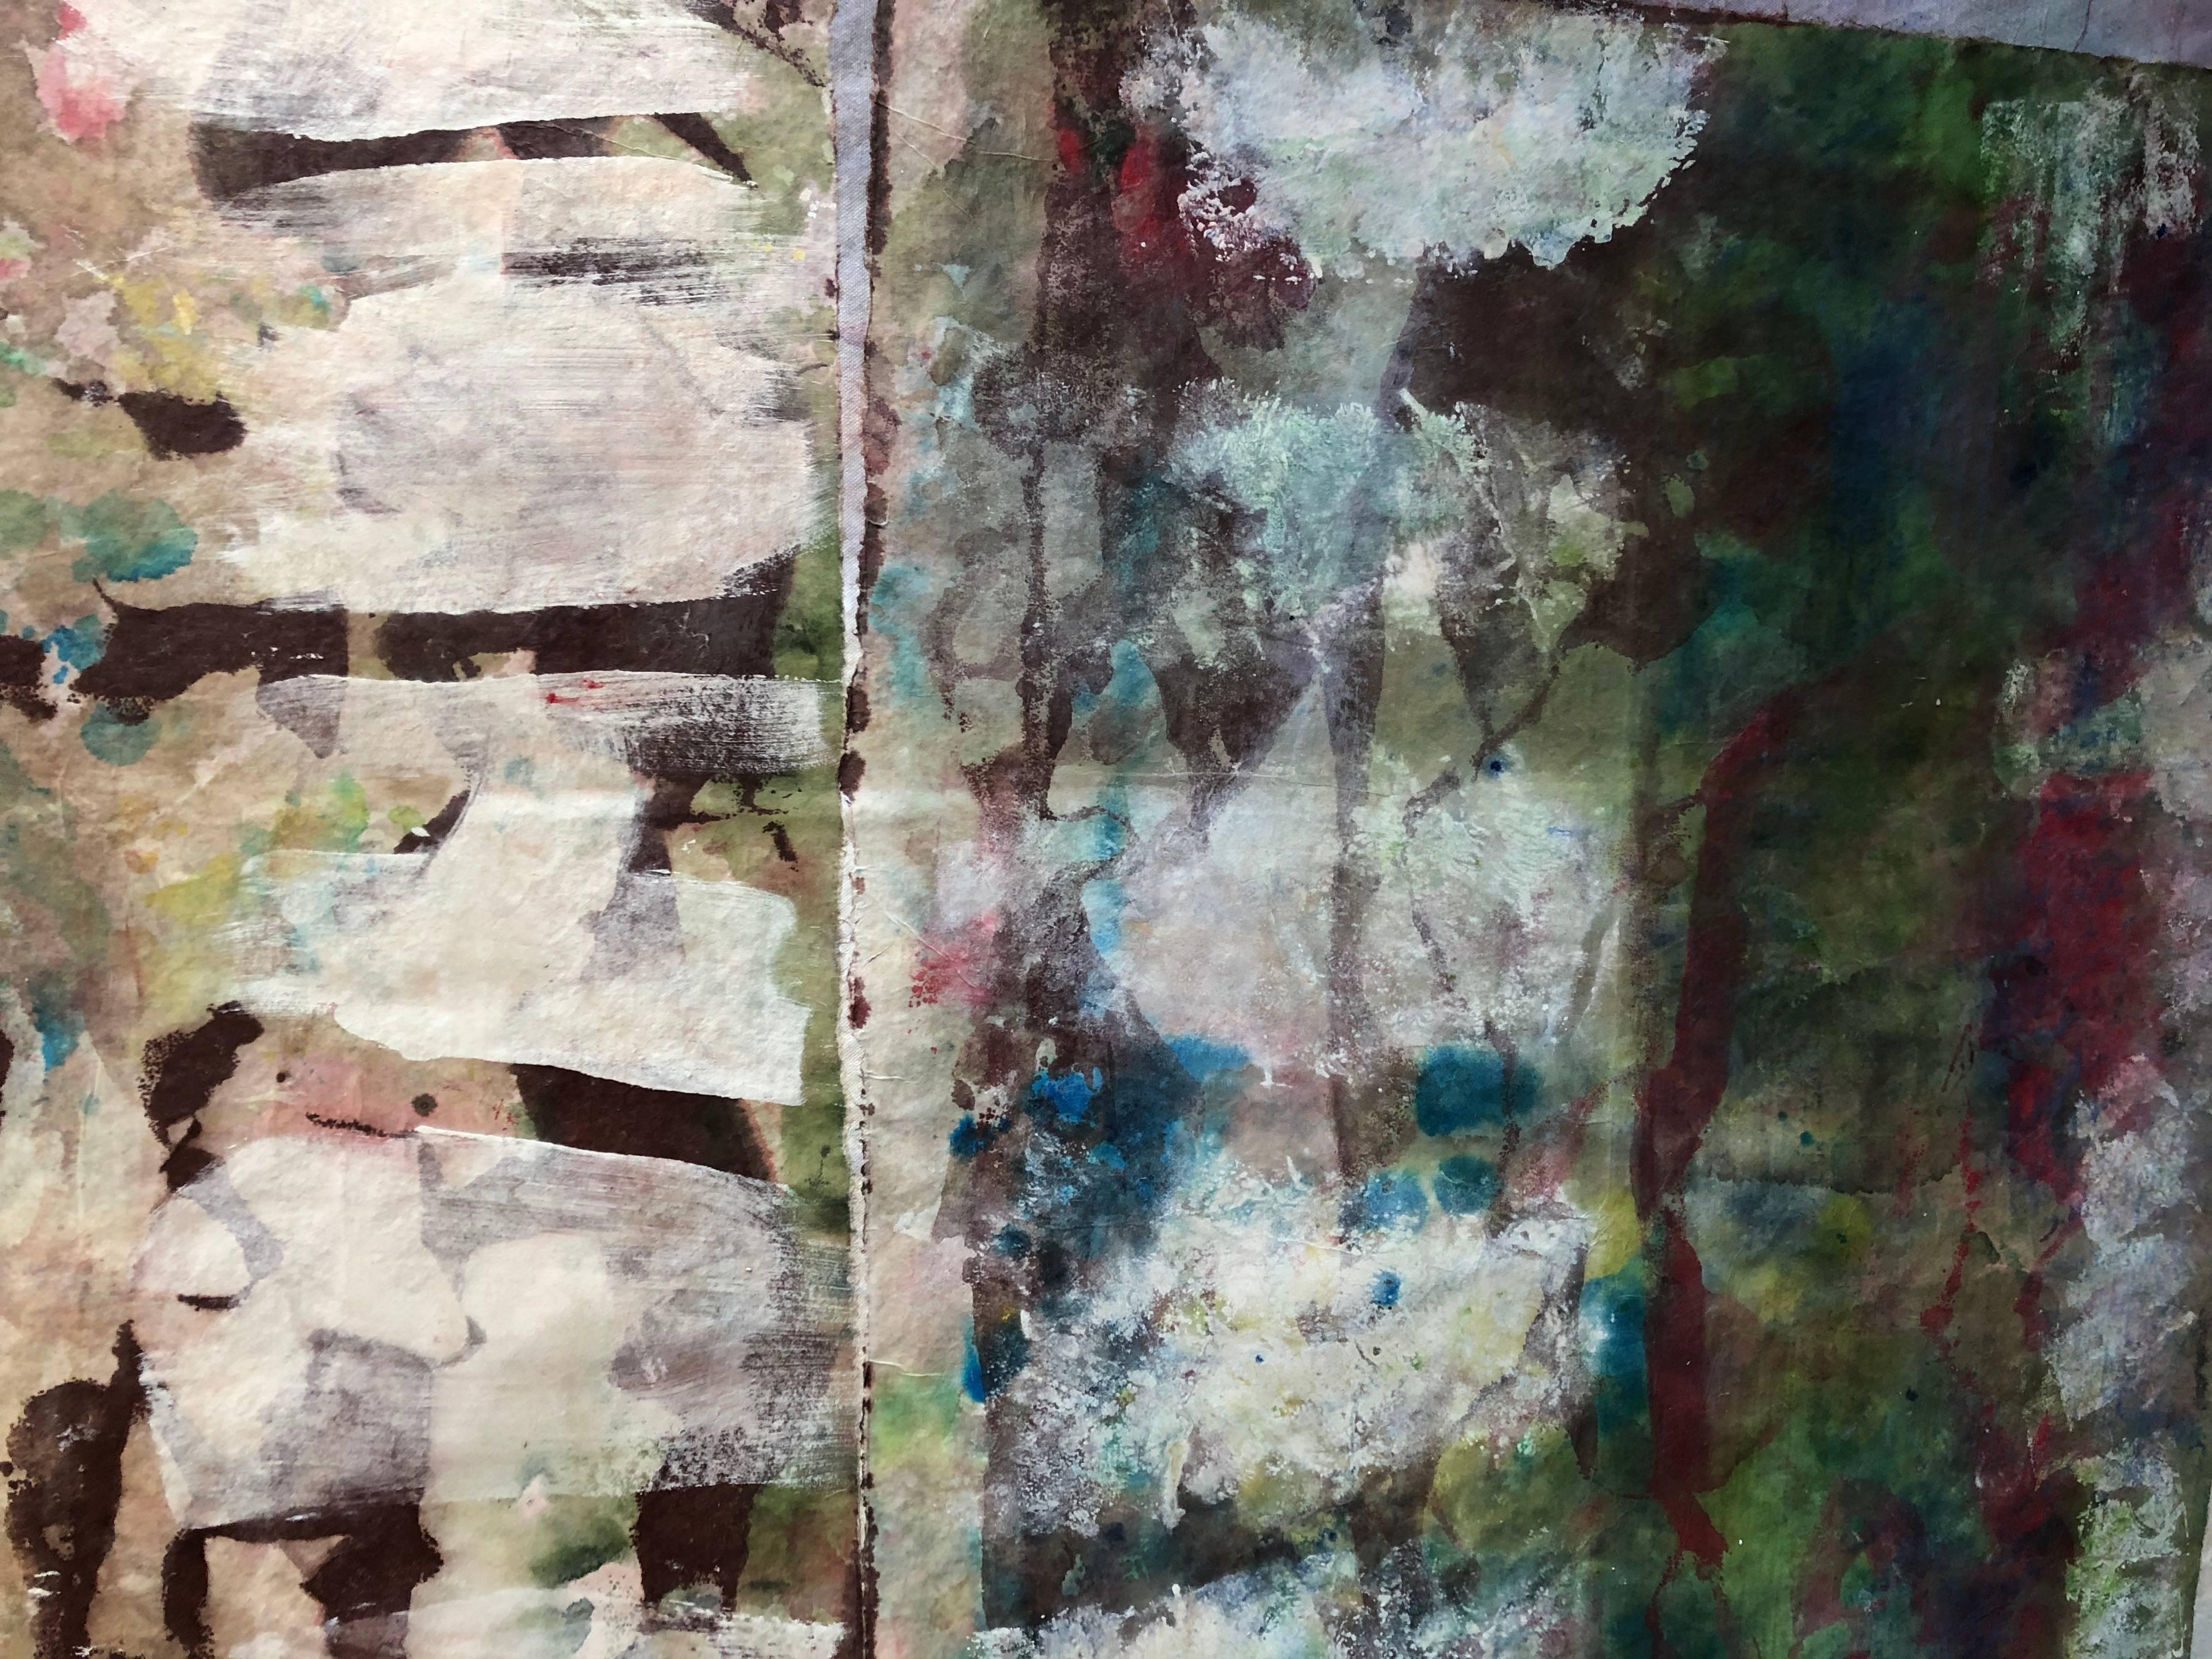 An original mixed media monotype painting and collage on canvas by American contemporary artist Monica Angle.